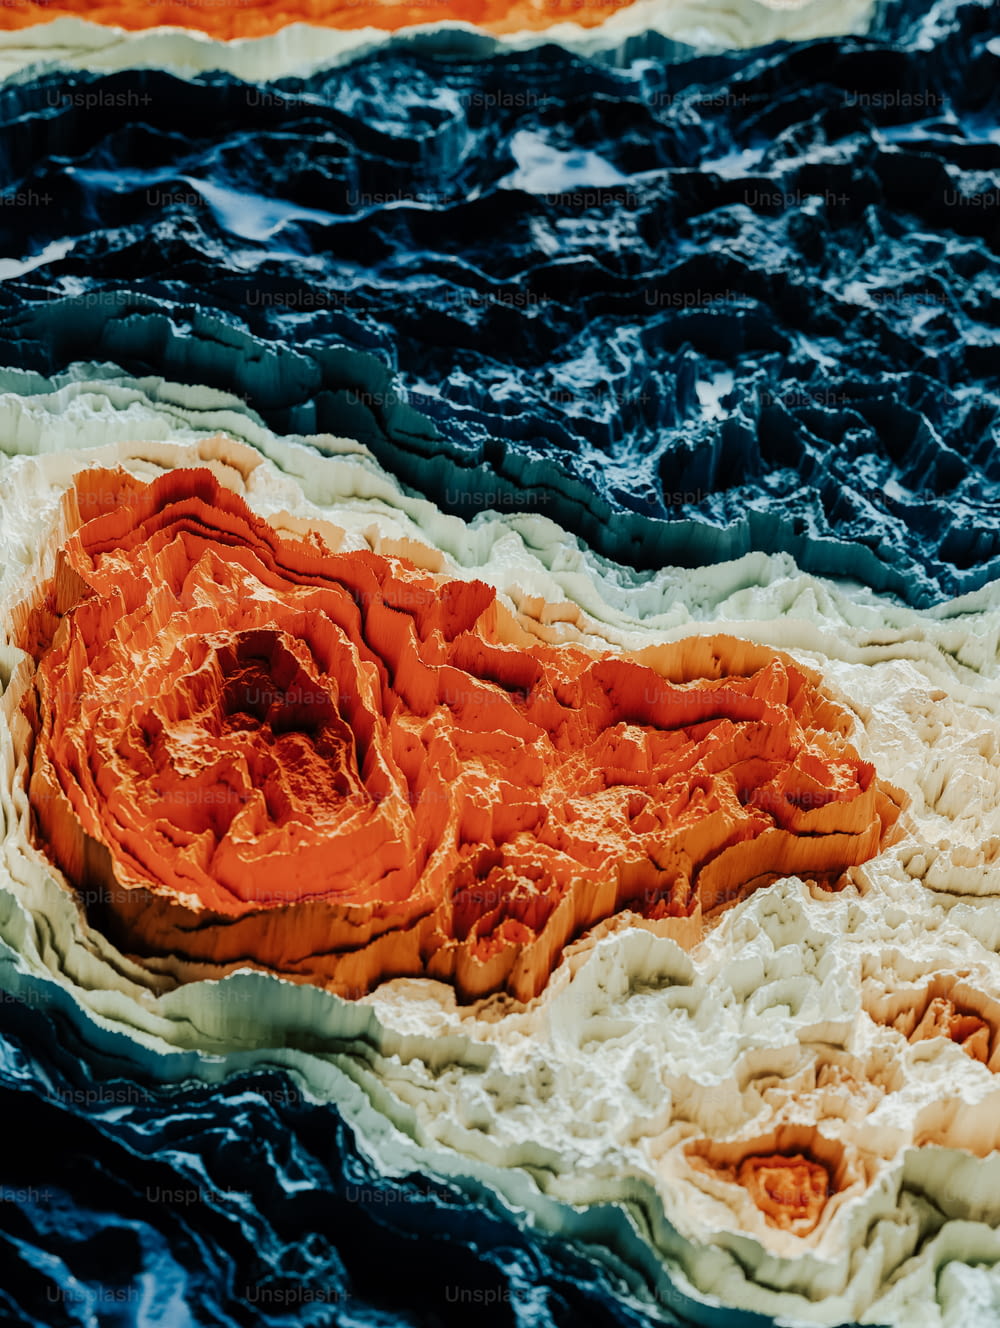 a close up of a piece of cloth in the water